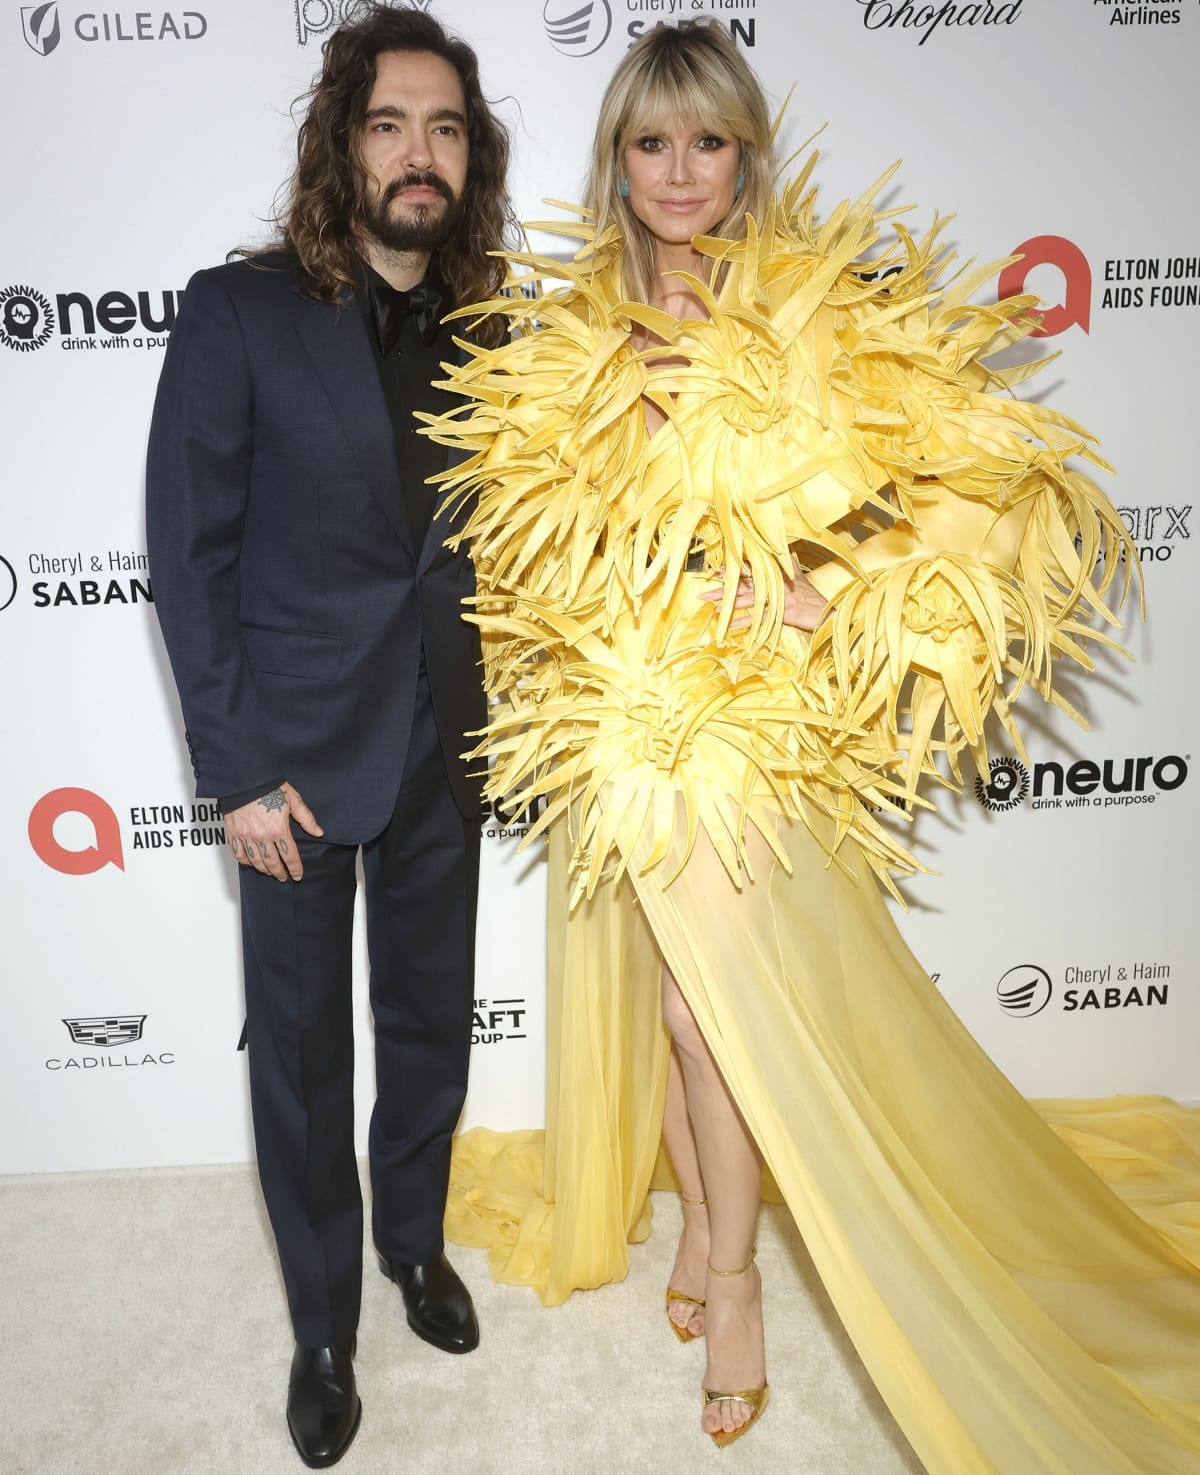 Tom Kaulitz joined wife Heidi Klum at the star-studded event hosted by the Elton John AIDS Foundation